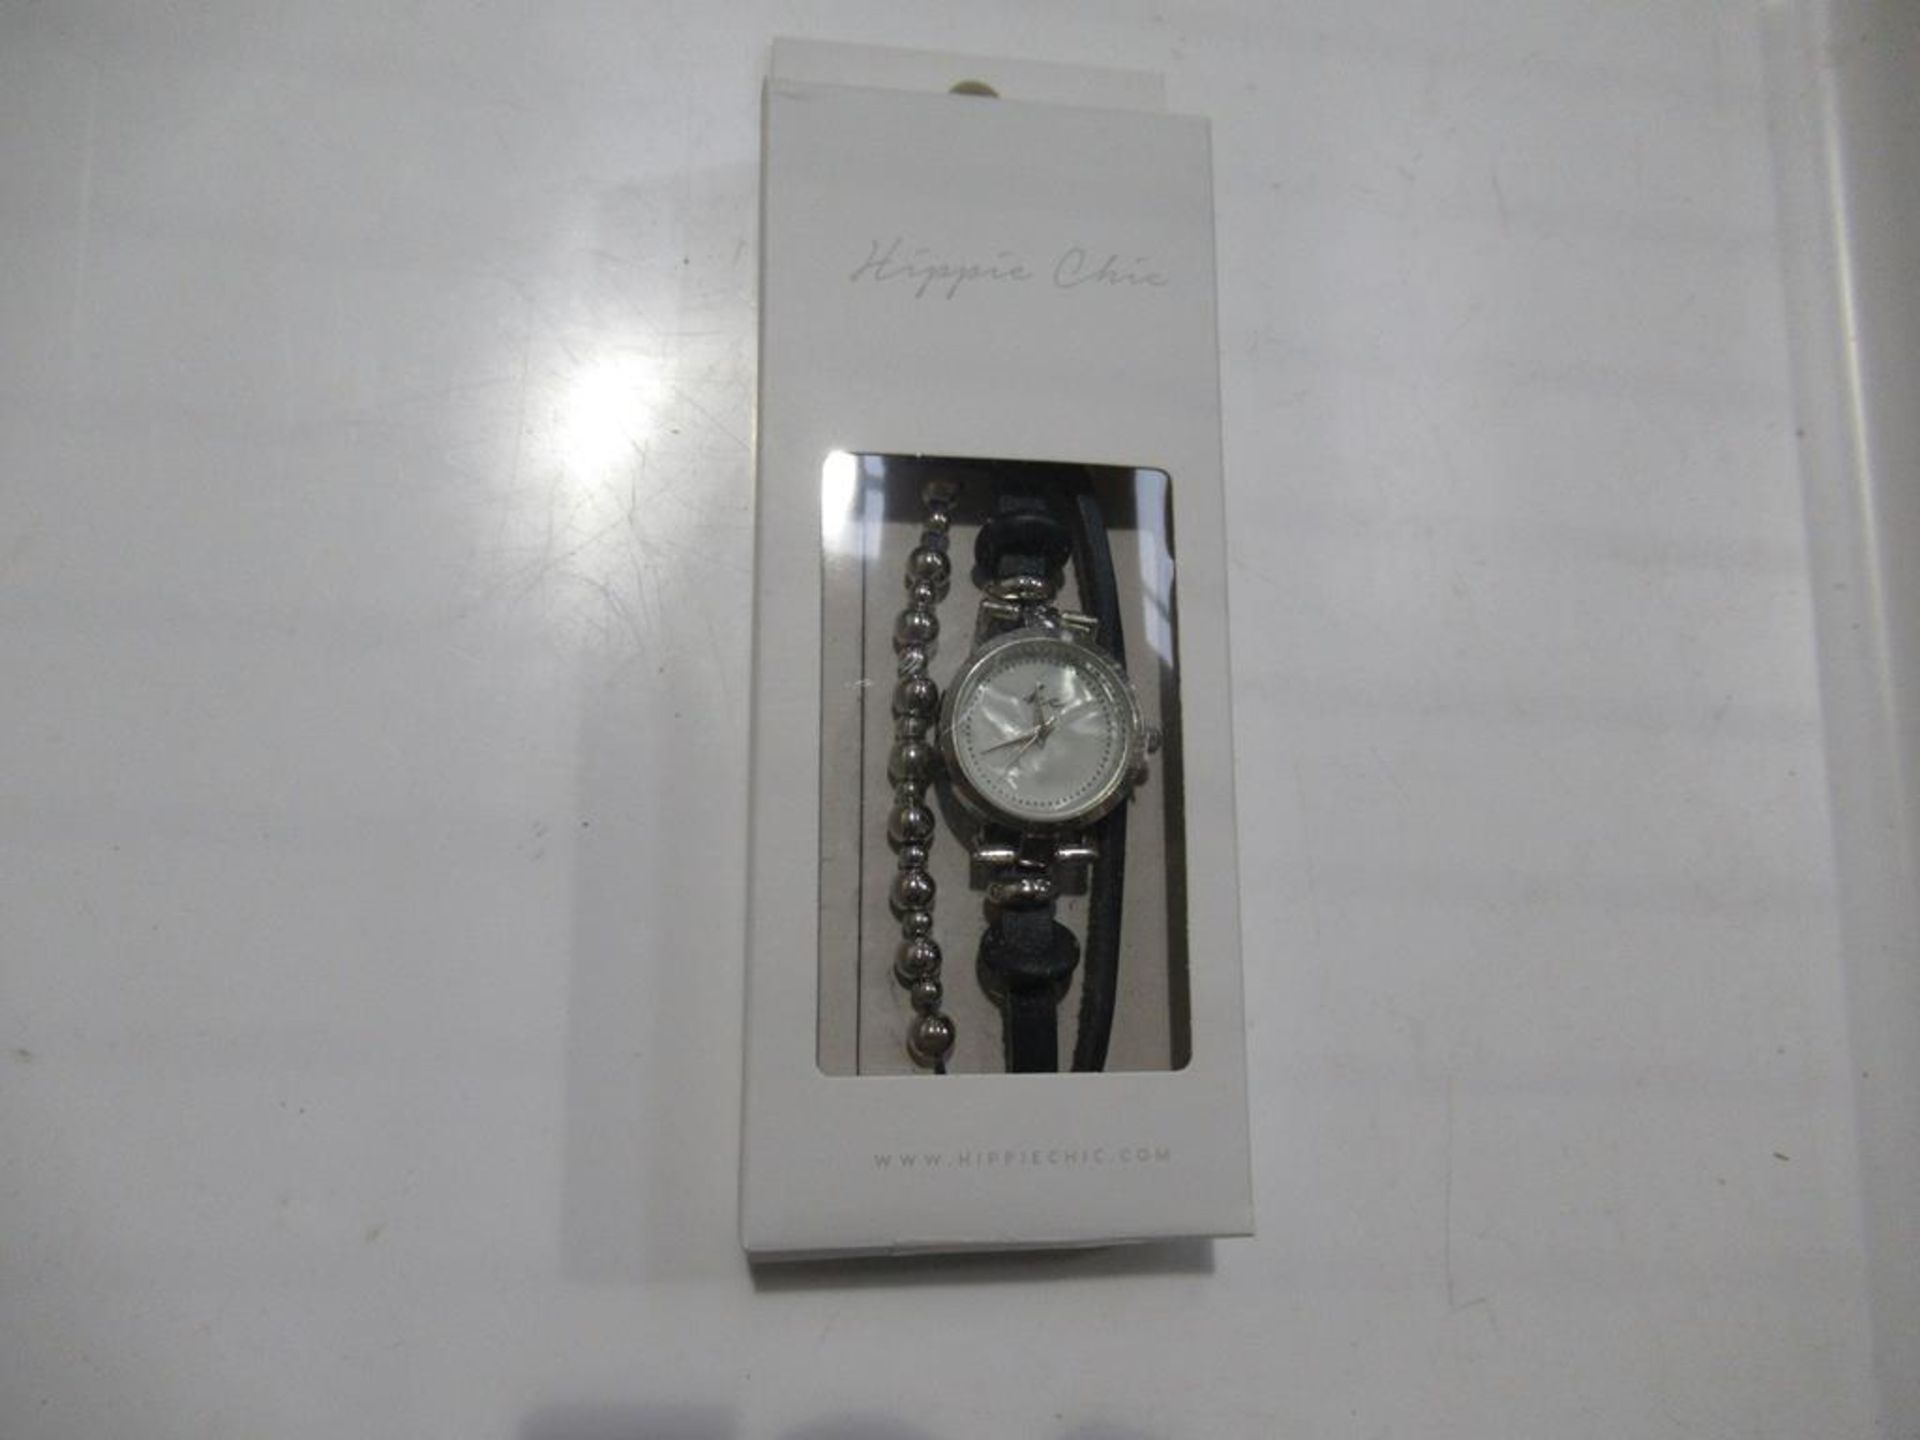 A box of Hippie Chic 'Rose' watches